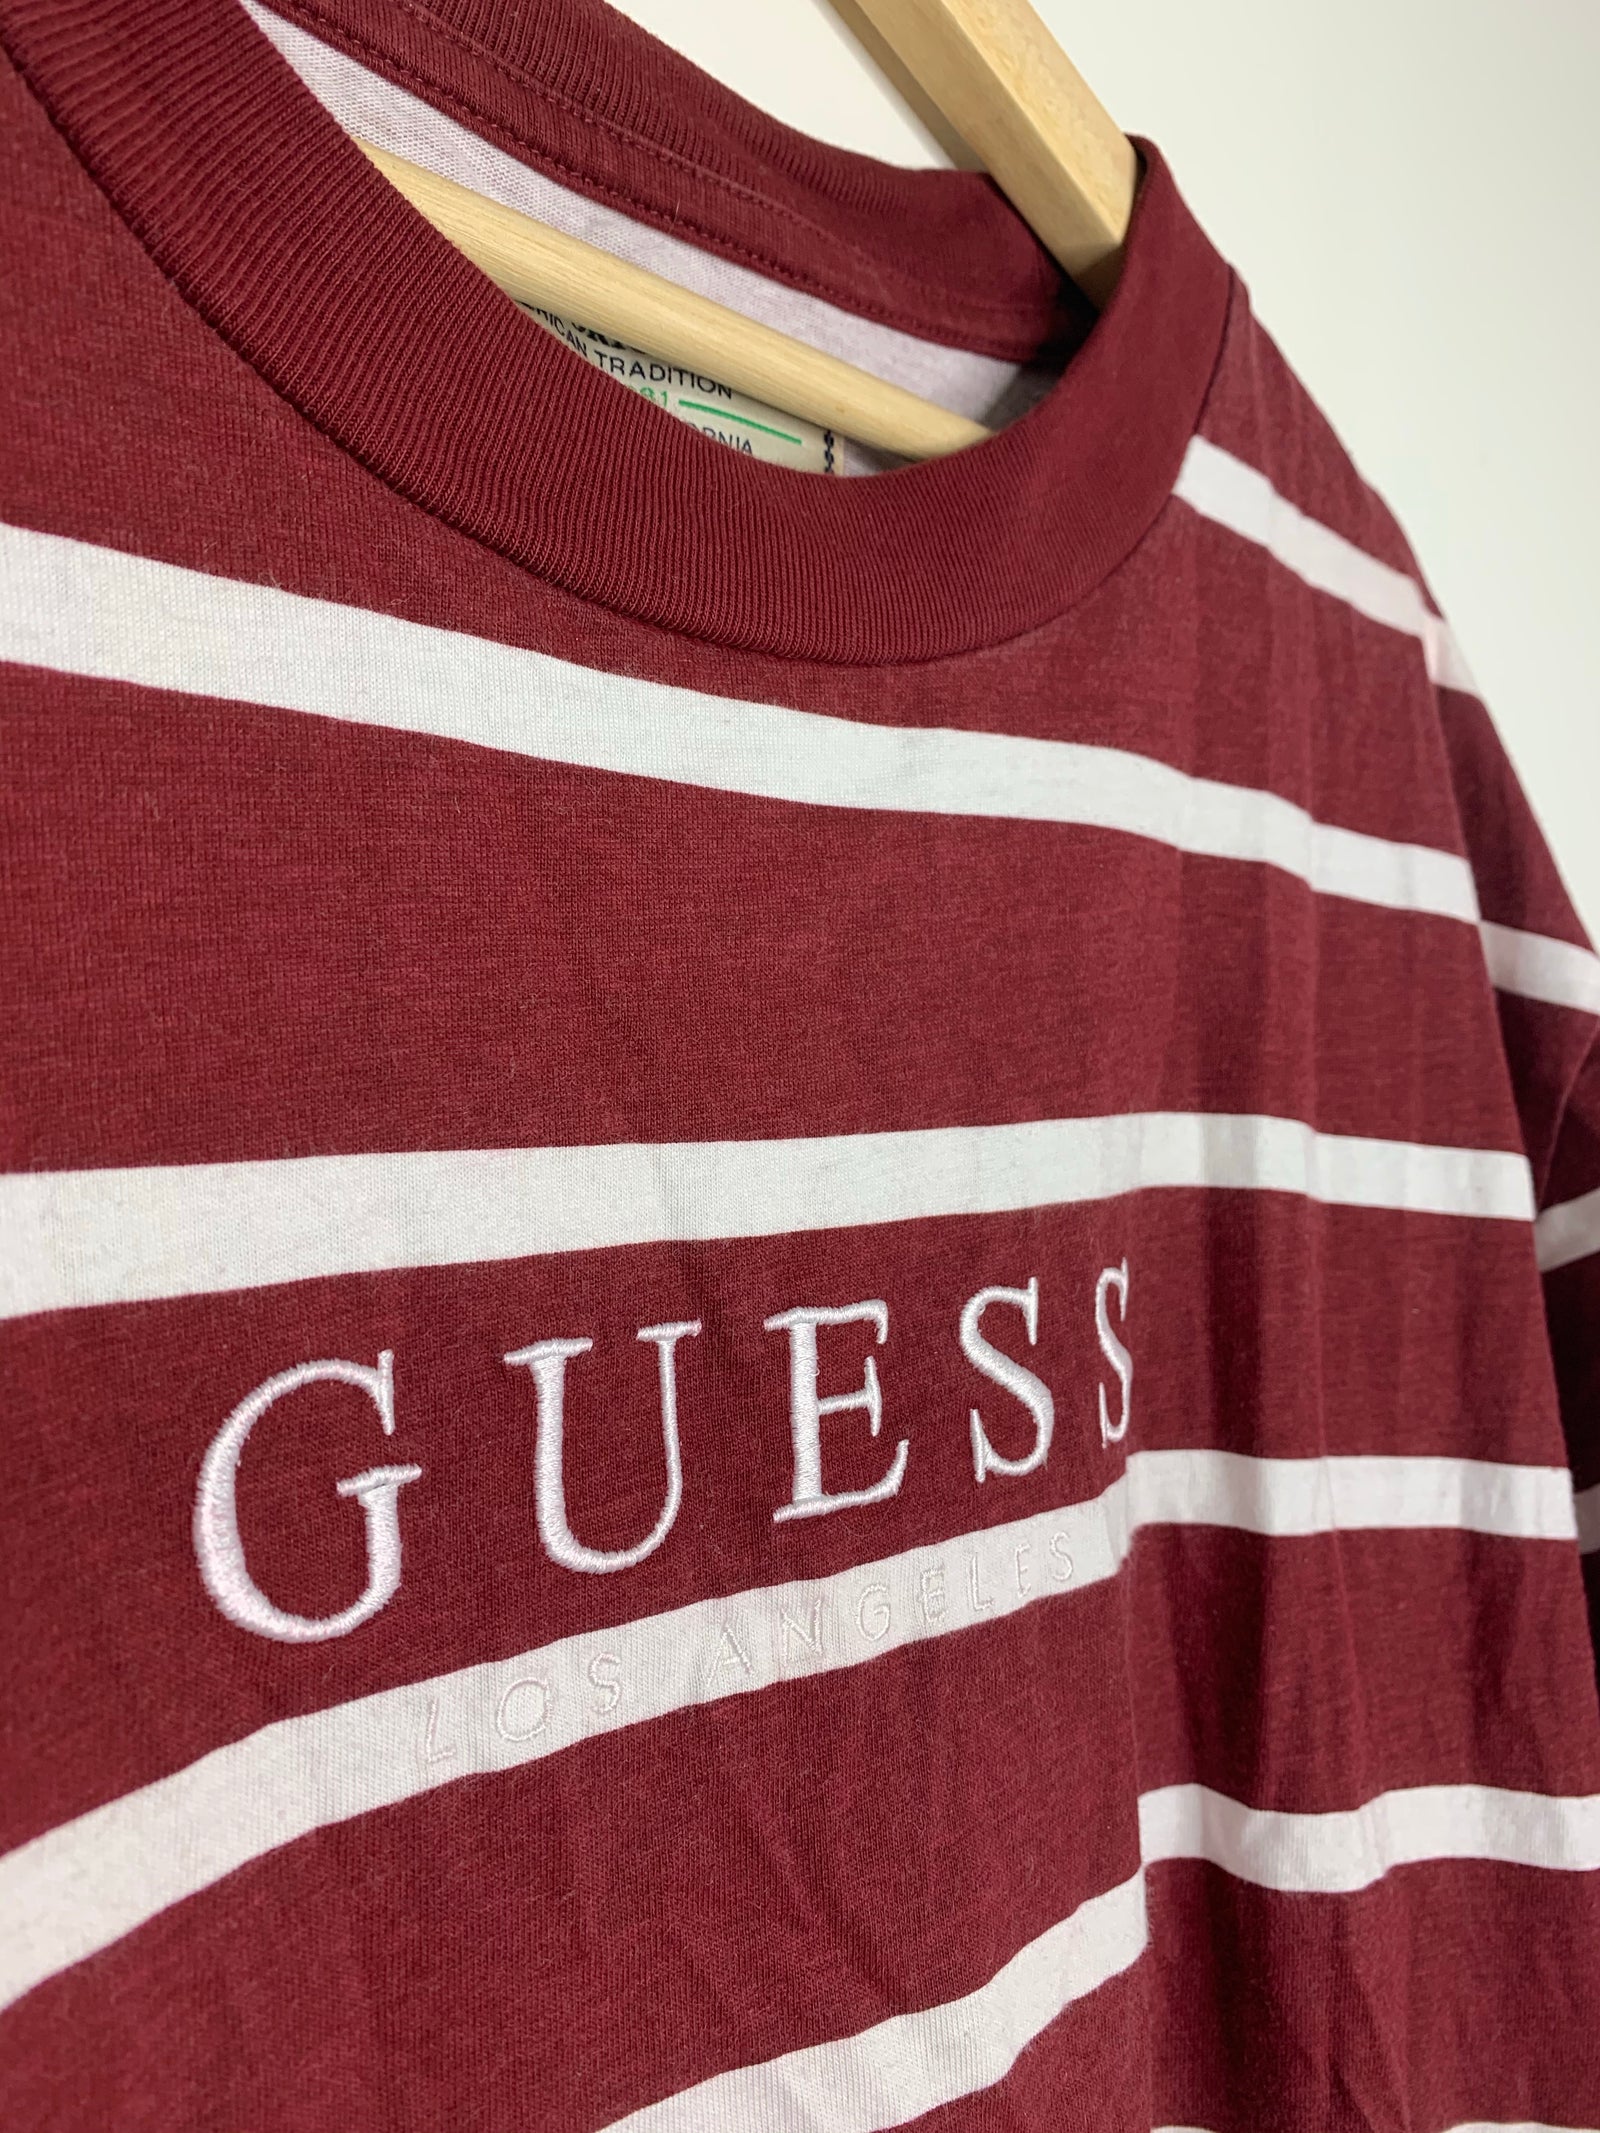 Guess Red and White Stripe T-shirt – The Youth Revolt